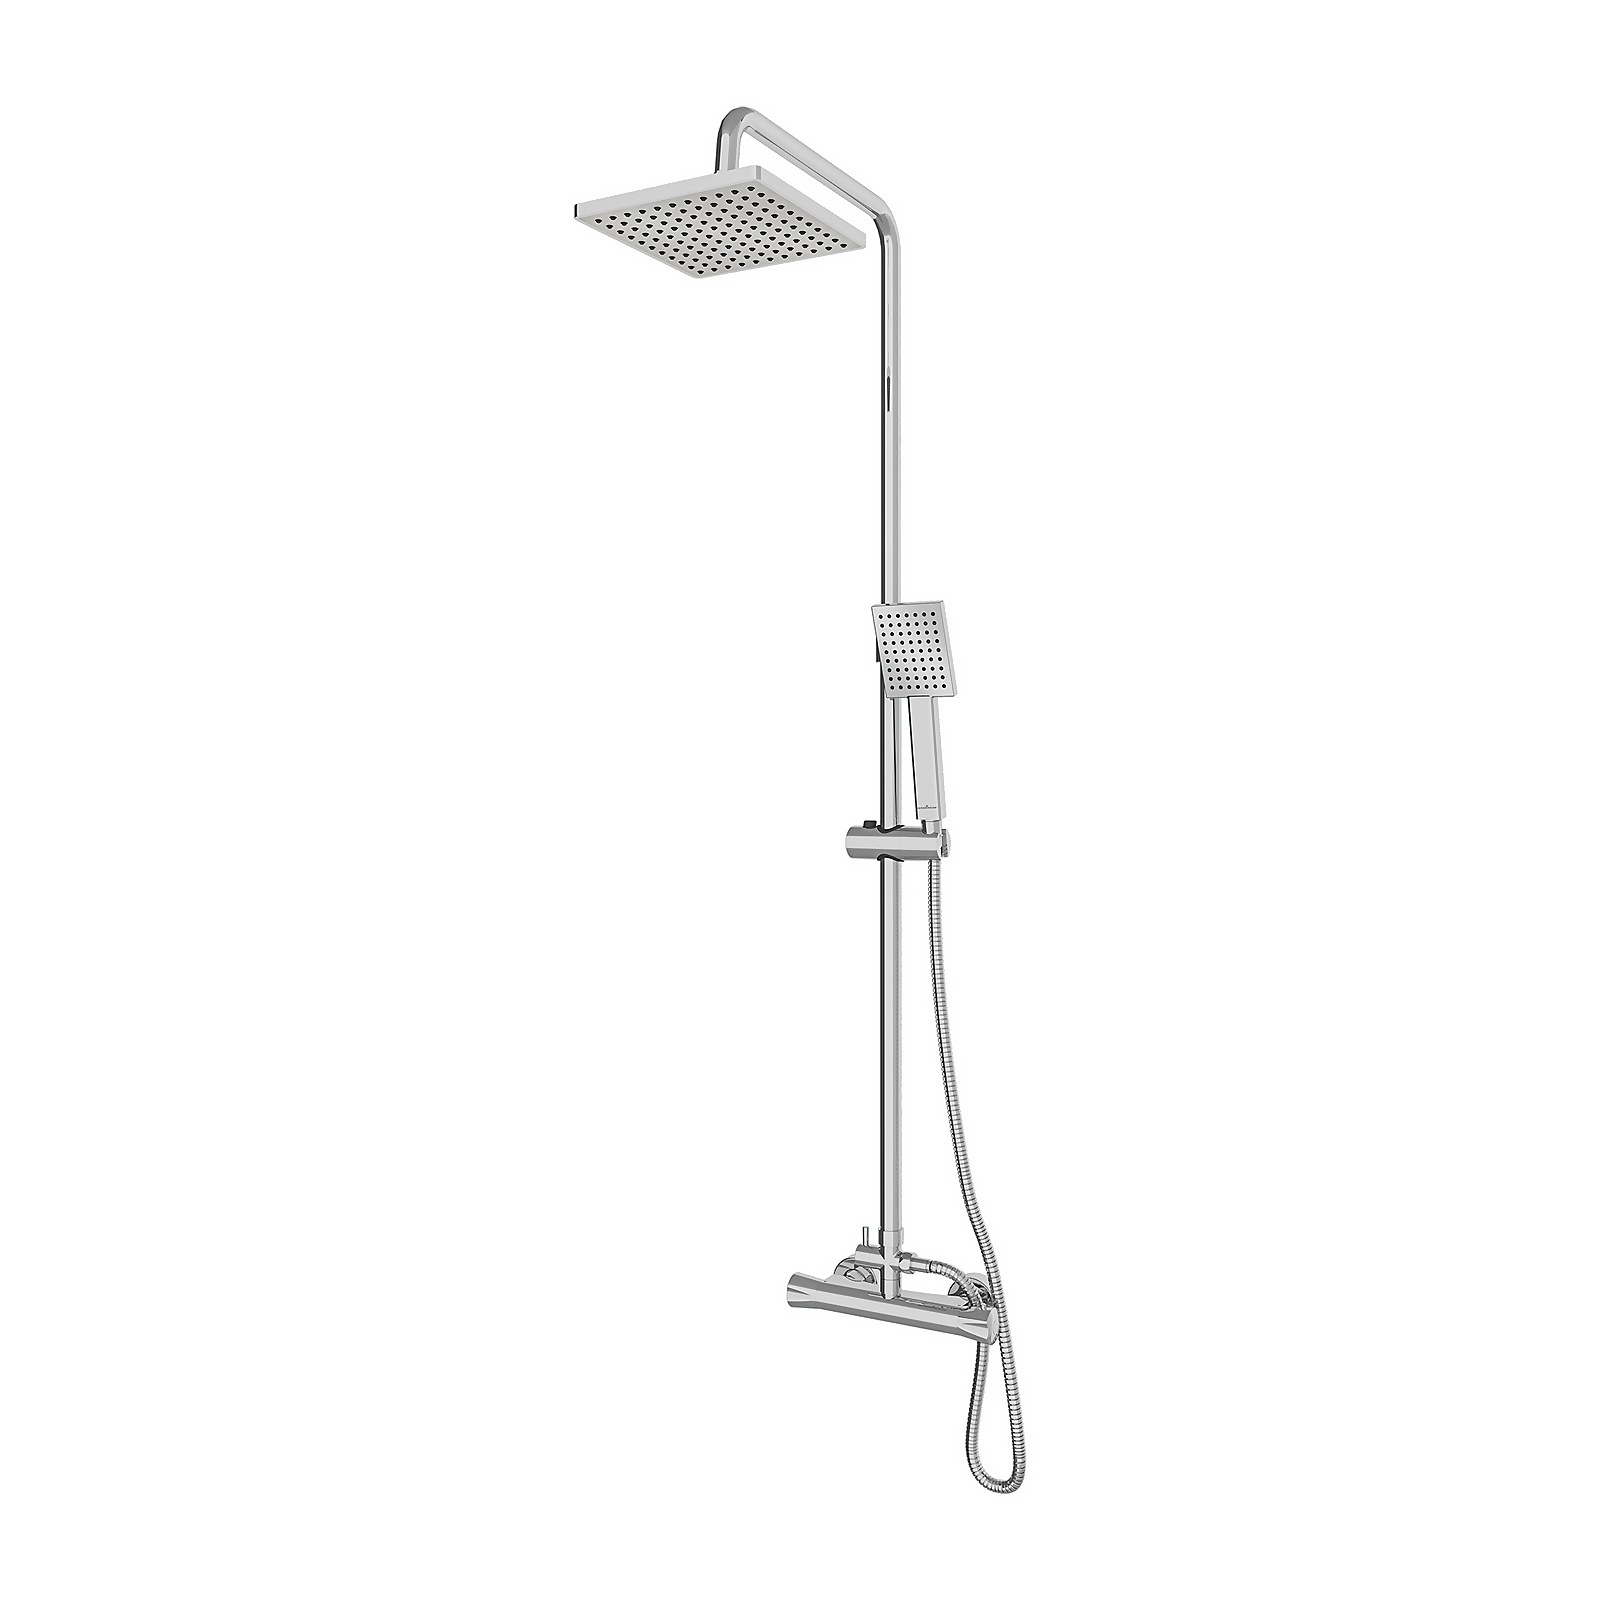 Photo of Gainsborough Square Dual Outlet Mixer Shower